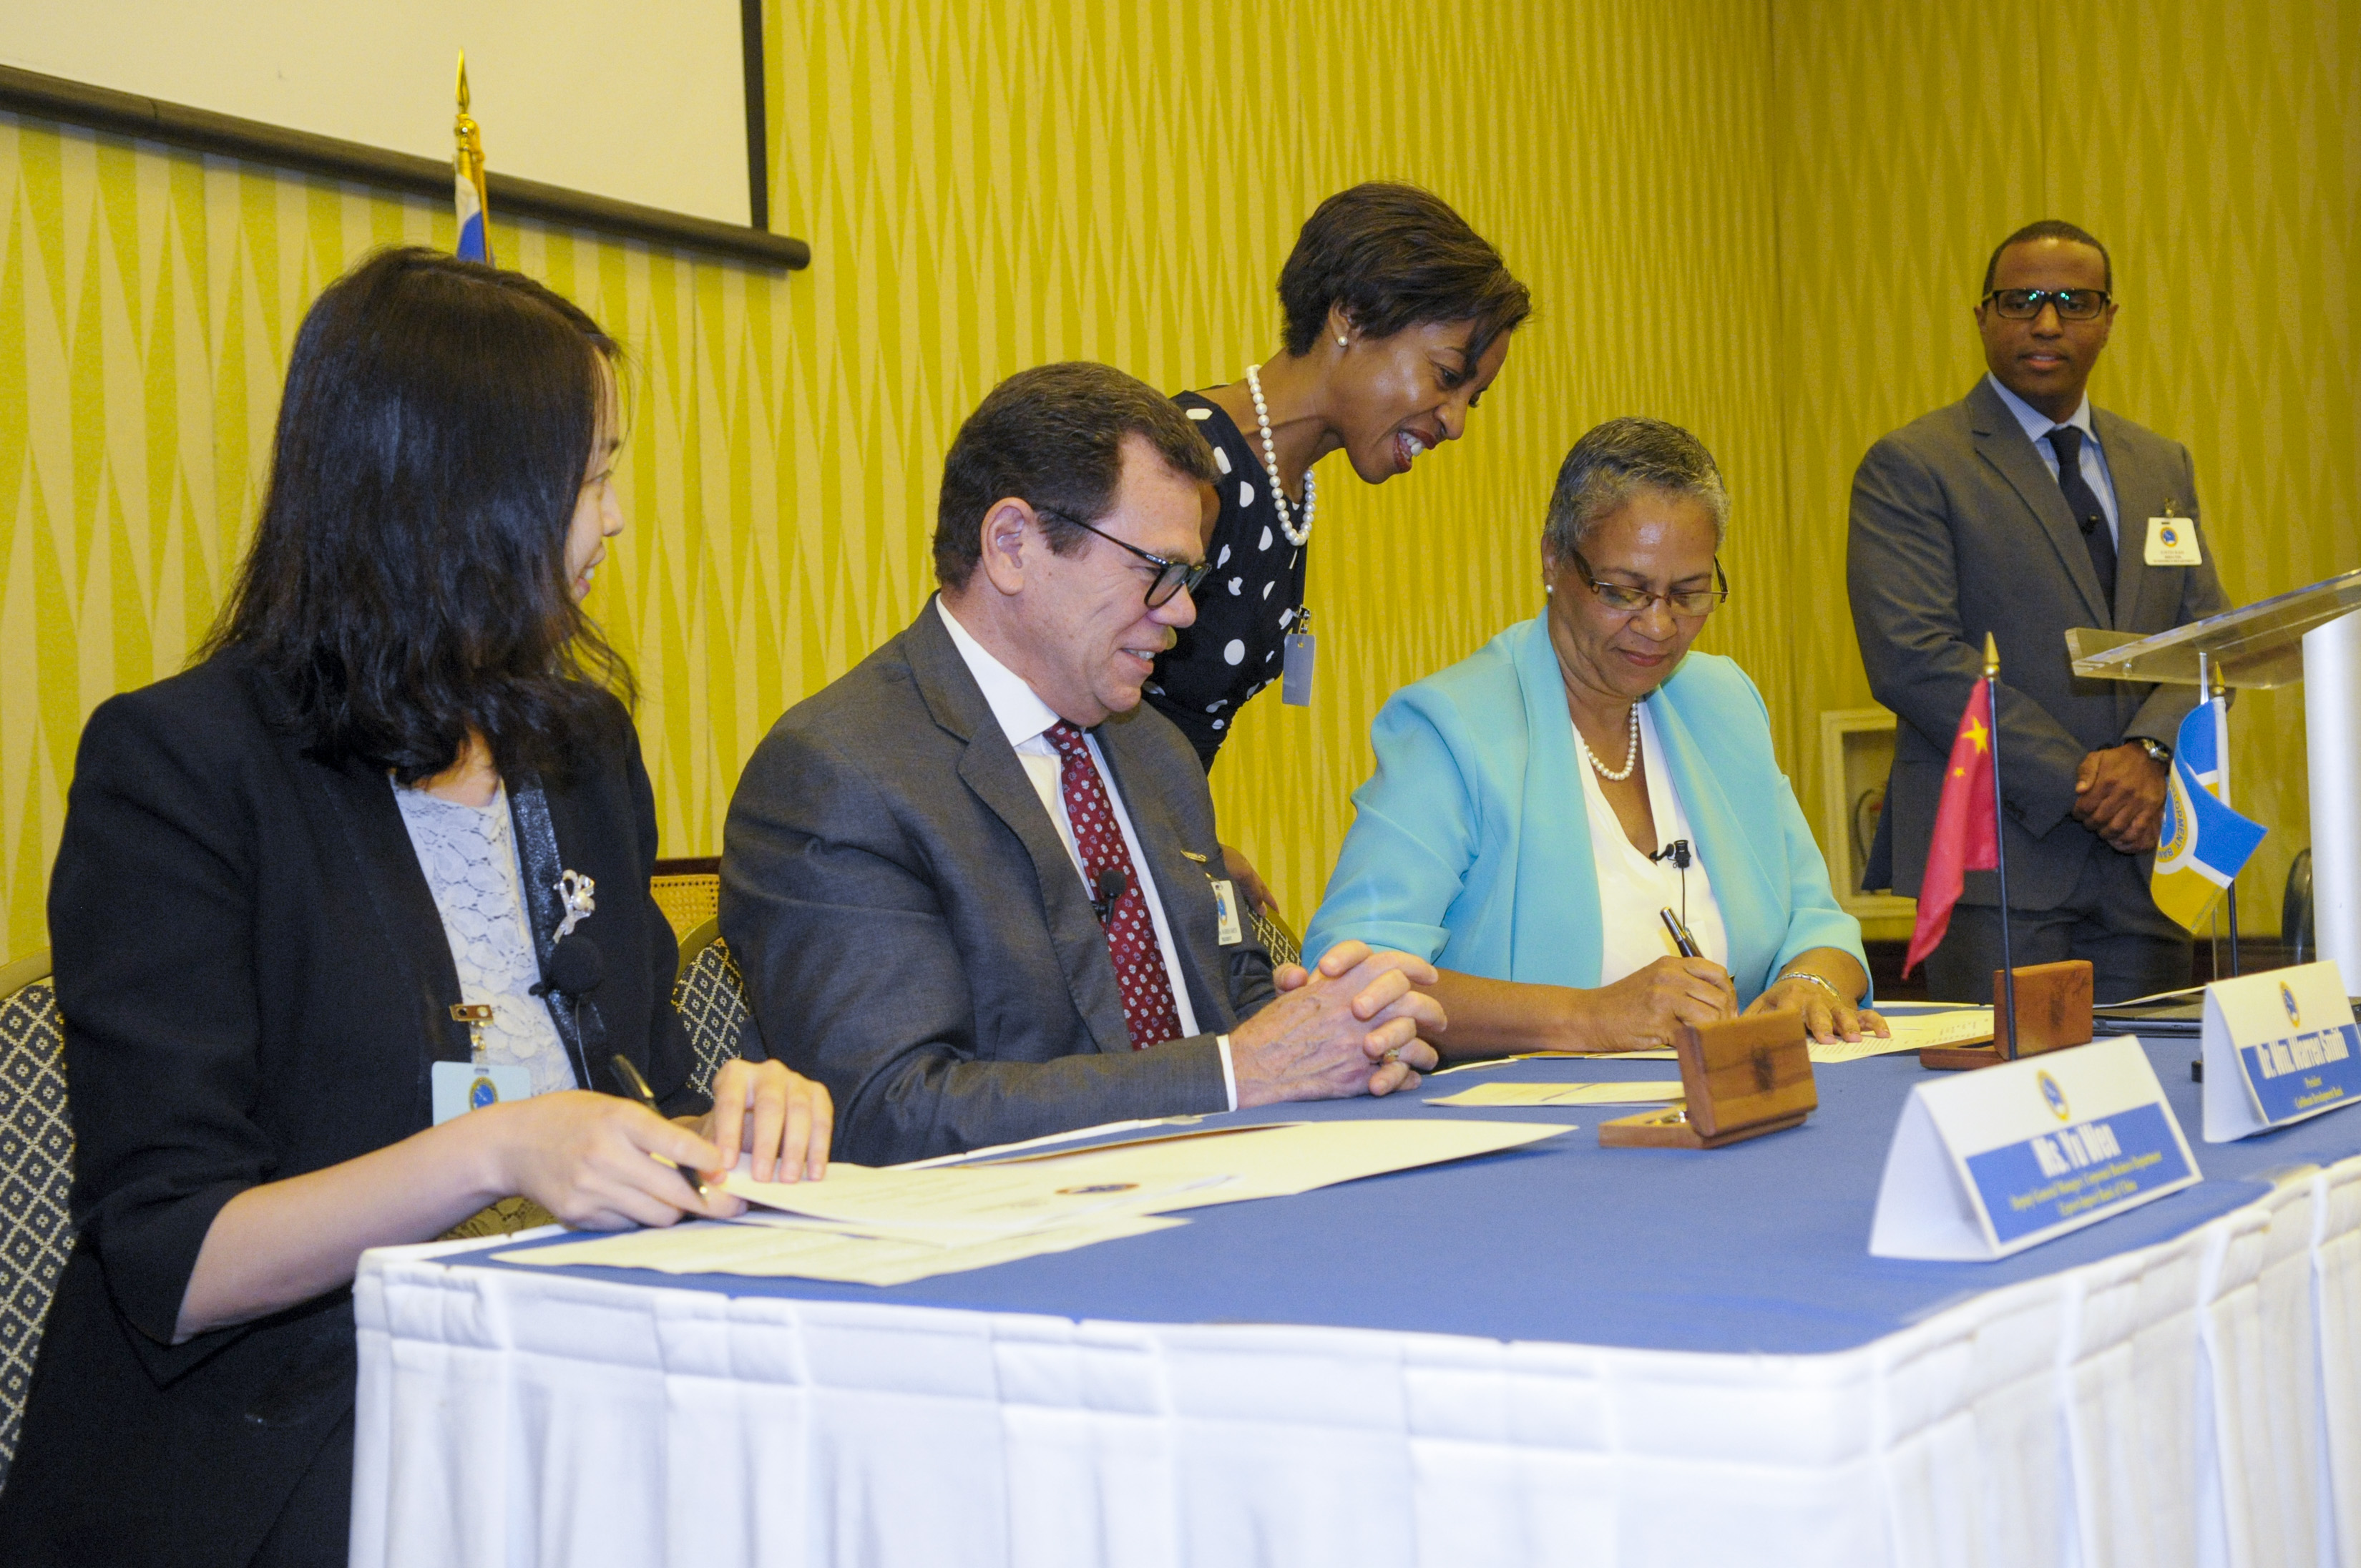 Monica La Bennett, Vice-President (Operations), CDB, signs the MOU between CDB and EXIM Bank of China on July 10, 2017. Looking on are (L-R) Yu Wen, Deputy General Manager, Corporate Business Department, EXIM Bank of China. Dr. Warren Smith, President, CDB, Diana Wilson Patrick, General Counsel, CDB and Dr. Justin Ram, Director, Economics, CDB.